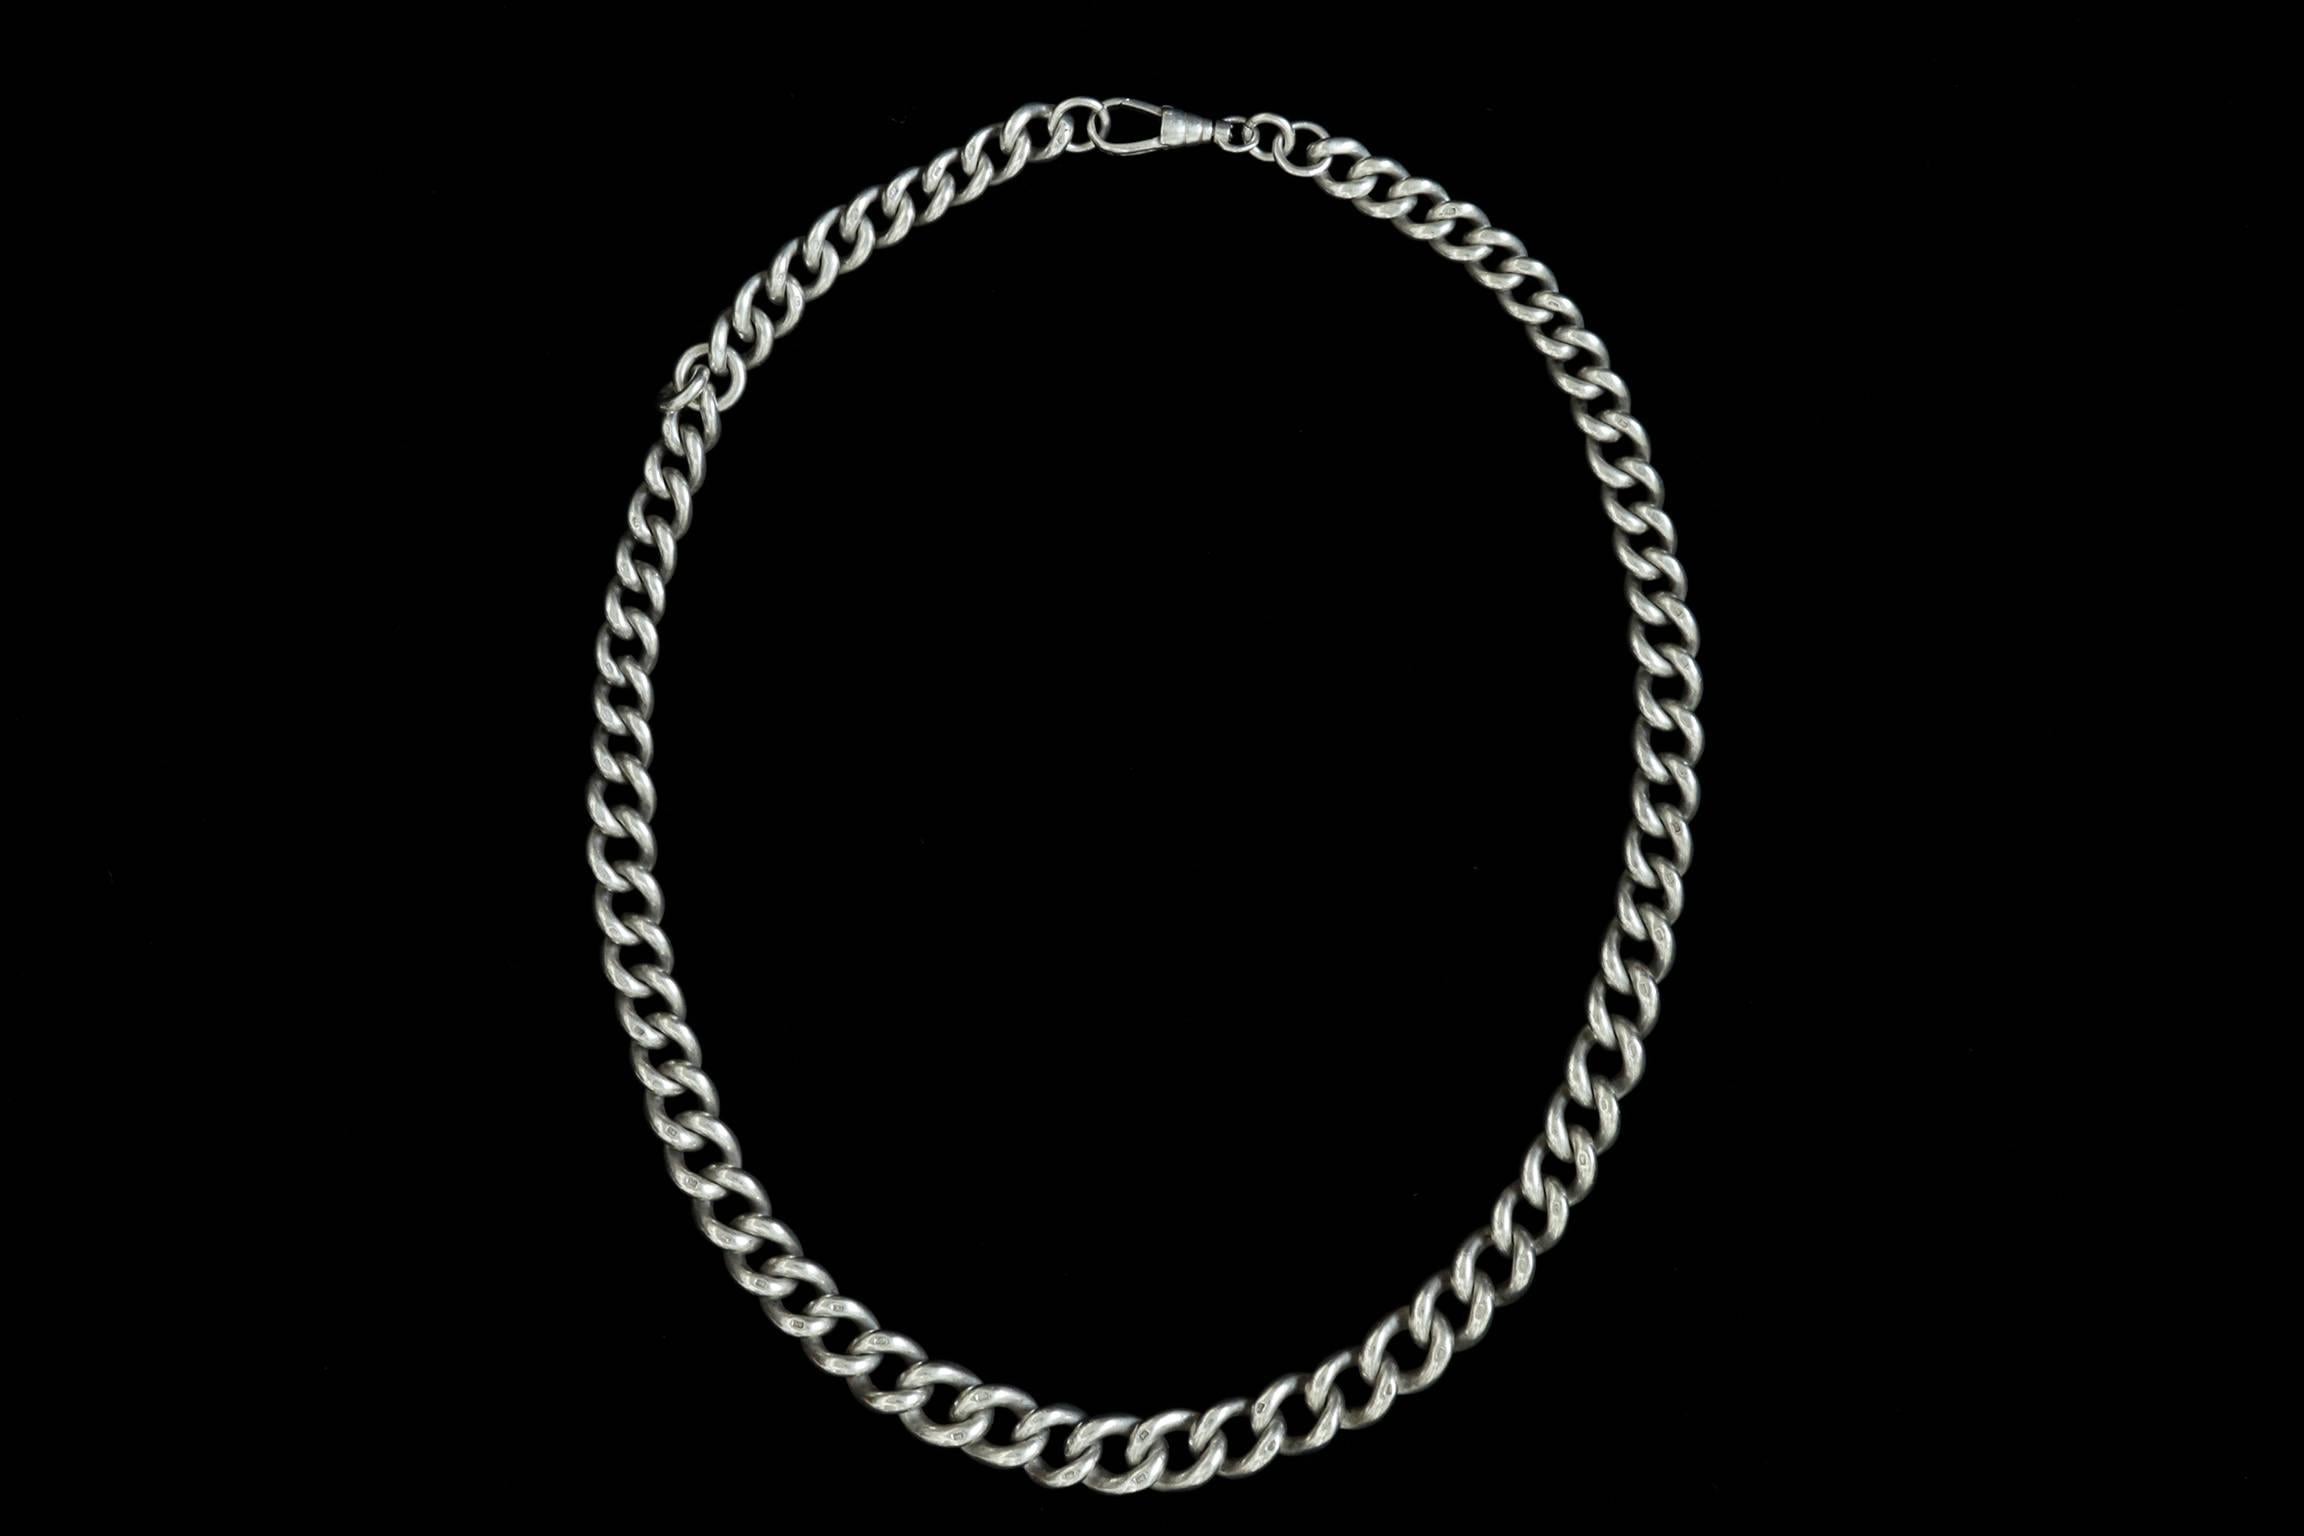 A very substantial and chunky Edwardian sterling silver Albert chain. The chain once was used for mens watch chain. It contains the original dog clip to add fobs, pendants or charms, and works as a wonderful necklace with a bold appearance. It